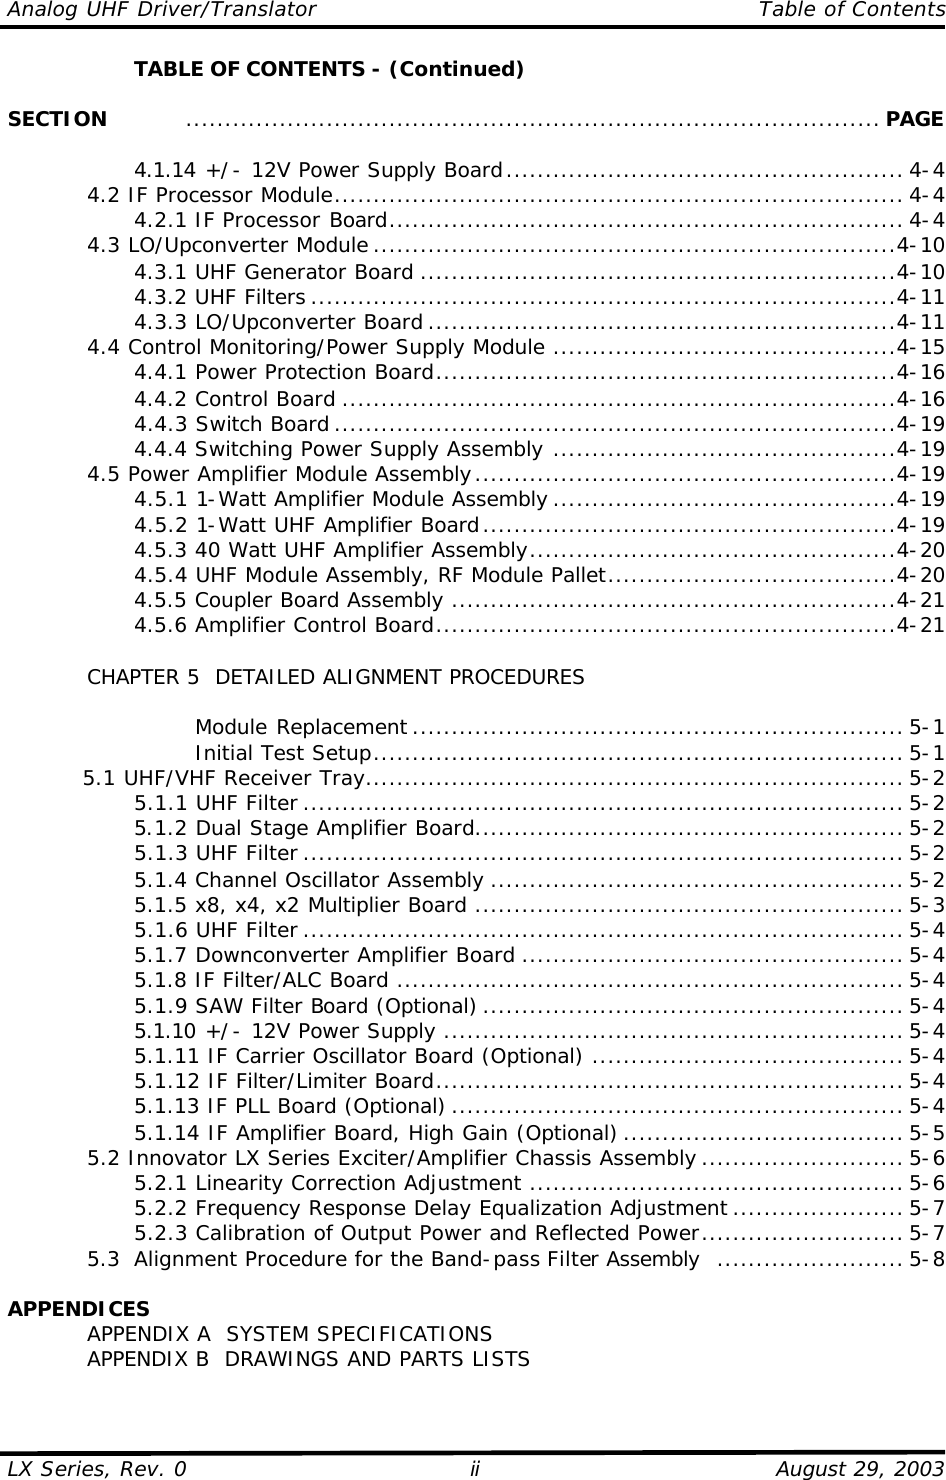 Analog UHF Driver/Translator    Table of Contents  LX Series, Rev. 0    August 29, 2003 ii     TABLE OF CONTENTS - (Continued)  SECTION    ......................................................................................... PAGE            4.1.14 +/- 12V Power Supply Board................................................... 4-4  4.2 IF Processor Module......................................................................... 4-4     4.2.1 IF Processor Board.................................................................. 4-4  4.3 LO/Upconverter Module ...................................................................4-10     4.3.1 UHF Generator Board .............................................................4-10     4.3.2 UHF Filters ...........................................................................4-11     4.3.3 LO/Upconverter Board ............................................................4-11  4.4 Control Monitoring/Power Supply Module ............................................4-15     4.4.1 Power Protection Board...........................................................4-16     4.4.2 Control Board .......................................................................4-16     4.4.3 Switch Board ........................................................................4-19     4.4.4 Switching Power Supply Assembly ............................................4-19  4.5 Power Amplifier Module Assembly......................................................4-19     4.5.1 1-Watt Amplifier Module Assembly ............................................4-19     4.5.2 1-Watt UHF Amplifier Board.....................................................4-19     4.5.3 40 Watt UHF Amplifier Assembly...............................................4-20     4.5.4 UHF Module Assembly, RF Module Pallet.....................................4-20     4.5.5 Coupler Board Assembly .........................................................4-21     4.5.6 Amplifier Control Board...........................................................4-21   CHAPTER 5  DETAILED ALIGNMENT PROCEDURES          Module Replacement ............................................................... 5-1         Initial Test Setup.................................................................... 5-1 5.1 UHF/VHF Receiver Tray..................................................................... 5-2     5.1.1 UHF Filter ............................................................................. 5-2     5.1.2 Dual Stage Amplifier Board....................................................... 5-2     5.1.3 UHF Filter ............................................................................. 5-2     5.1.4 Channel Oscillator Assembly ..................................................... 5-2     5.1.5 x8, x4, x2 Multiplier Board ....................................................... 5-3     5.1.6 UHF Filter ............................................................................. 5-4     5.1.7 Downconverter Amplifier Board ................................................. 5-4     5.1.8 IF Filter/ALC Board ................................................................. 5-4     5.1.9 SAW Filter Board (Optional) ...................................................... 5-4     5.1.10 +/- 12V Power Supply ........................................................... 5-4     5.1.11 IF Carrier Oscillator Board (Optional) ........................................ 5-4     5.1.12 IF Filter/Limiter Board............................................................ 5-4     5.1.13 IF PLL Board (Optional) .......................................................... 5-4     5.1.14 IF Amplifier Board, High Gain (Optional) .................................... 5-5  5.2 Innovator LX Series Exciter/Amplifier Chassis Assembly .......................... 5-6     5.2.1 Linearity Correction Adjustment ................................................ 5-6     5.2.2 Frequency Response Delay Equalization Adjustment ...................... 5-7     5.2.3 Calibration of Output Power and Reflected Power.......................... 5-7  5.3  Alignment Procedure for the Band-pass Filter Assembly ........................ 5-8  APPENDICES  APPENDIX A  SYSTEM SPECIFICATIONS  APPENDIX B  DRAWINGS AND PARTS LISTS 